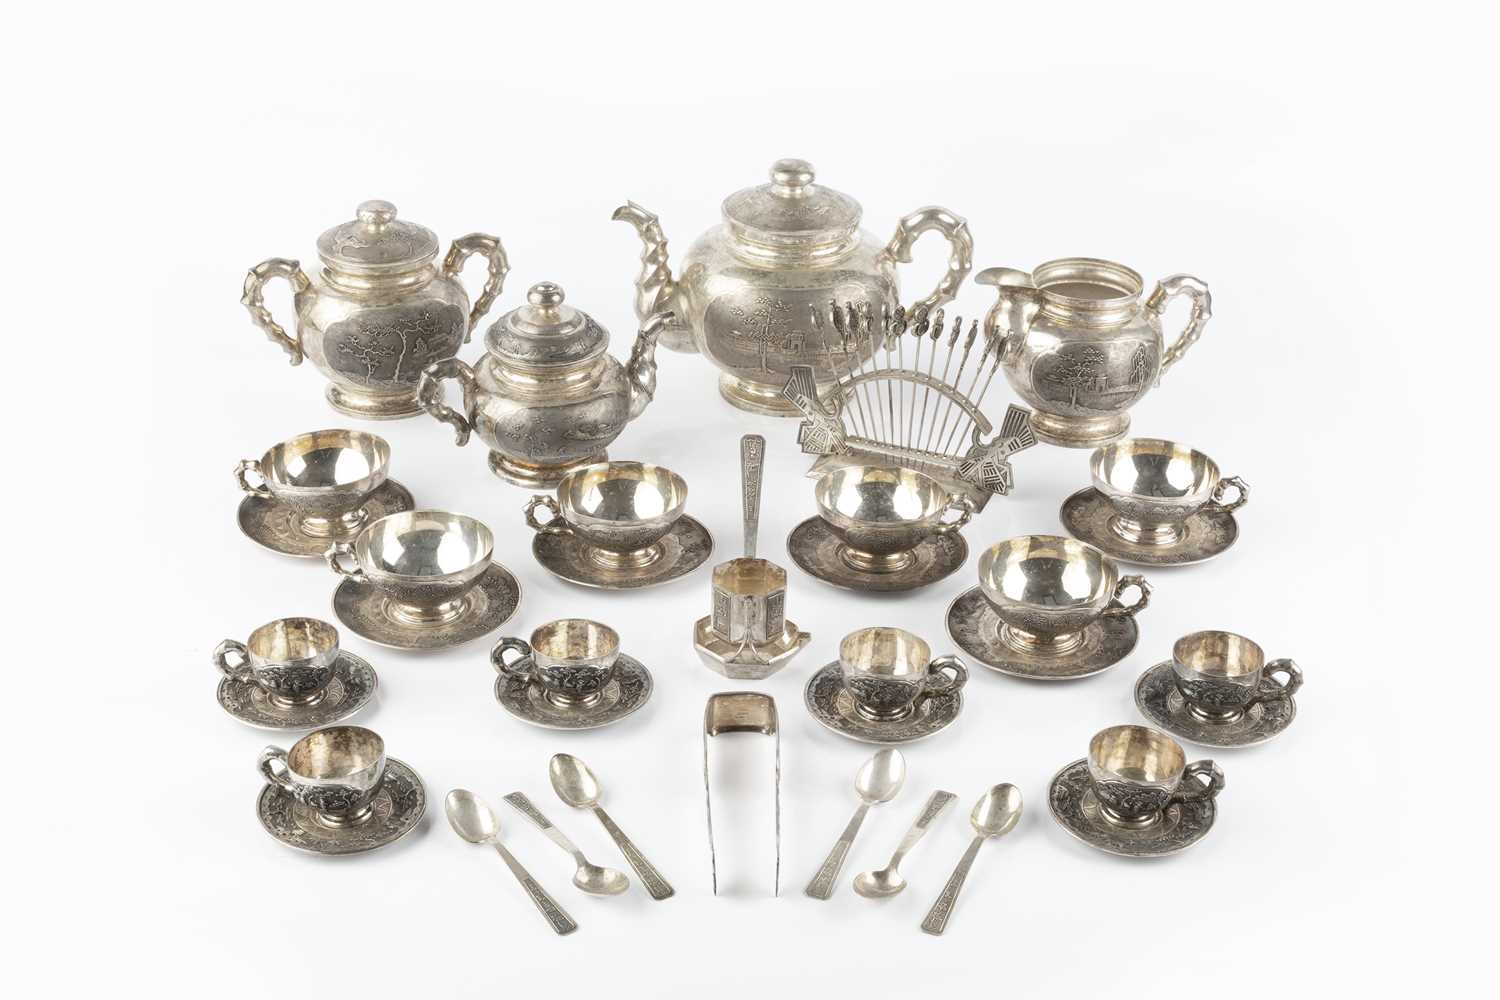 An extensive Vietnamese silver tea service, relief decorated and engraved with landscape